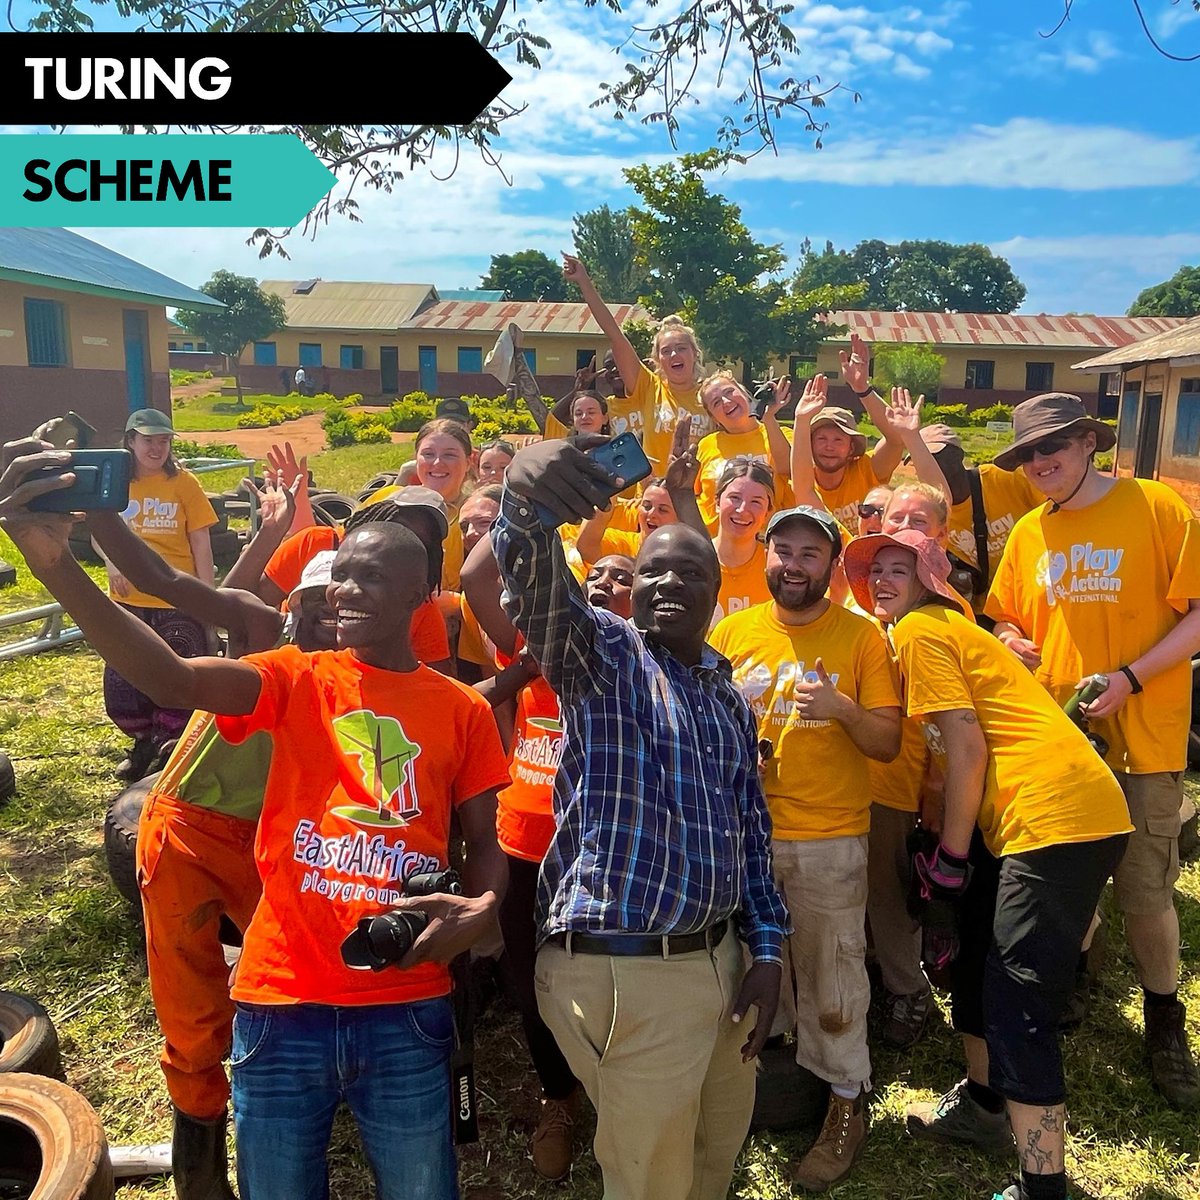 Student #volunteering opportunities funded by the #TuringScheme are having a positive impact on participants & communities around the world 🌍 Read more in our guest #blogpost from @PlayActionInt 👉 turing-scheme.org.uk/the-turing-sch…

#Students #studentlife #studyworkabroad #universities